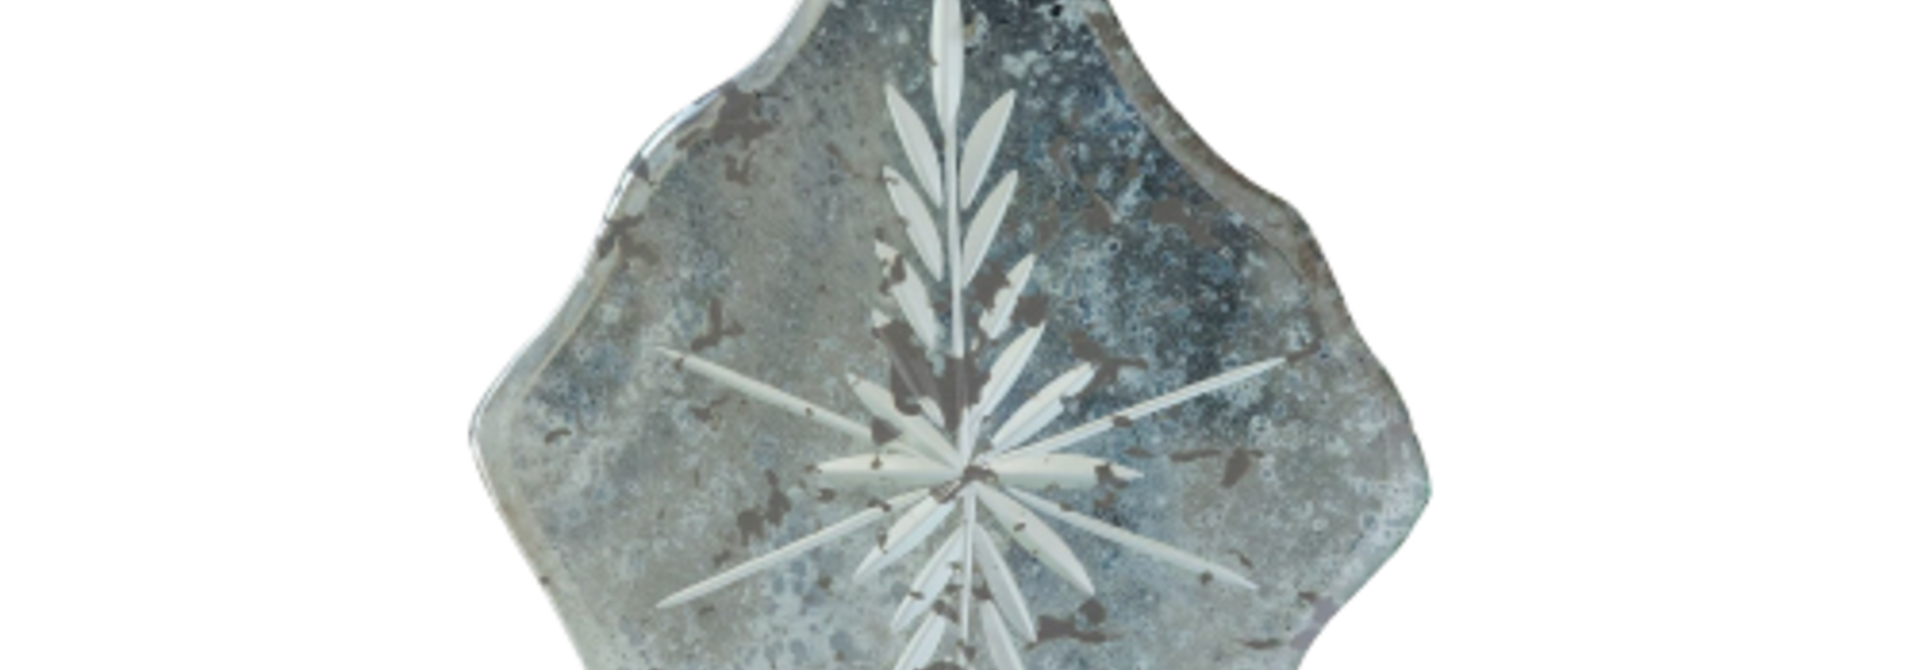 Antiqued Diamond Snowflake | The Holiday Ornament Collection - 4 Inch x 5.25 Inch